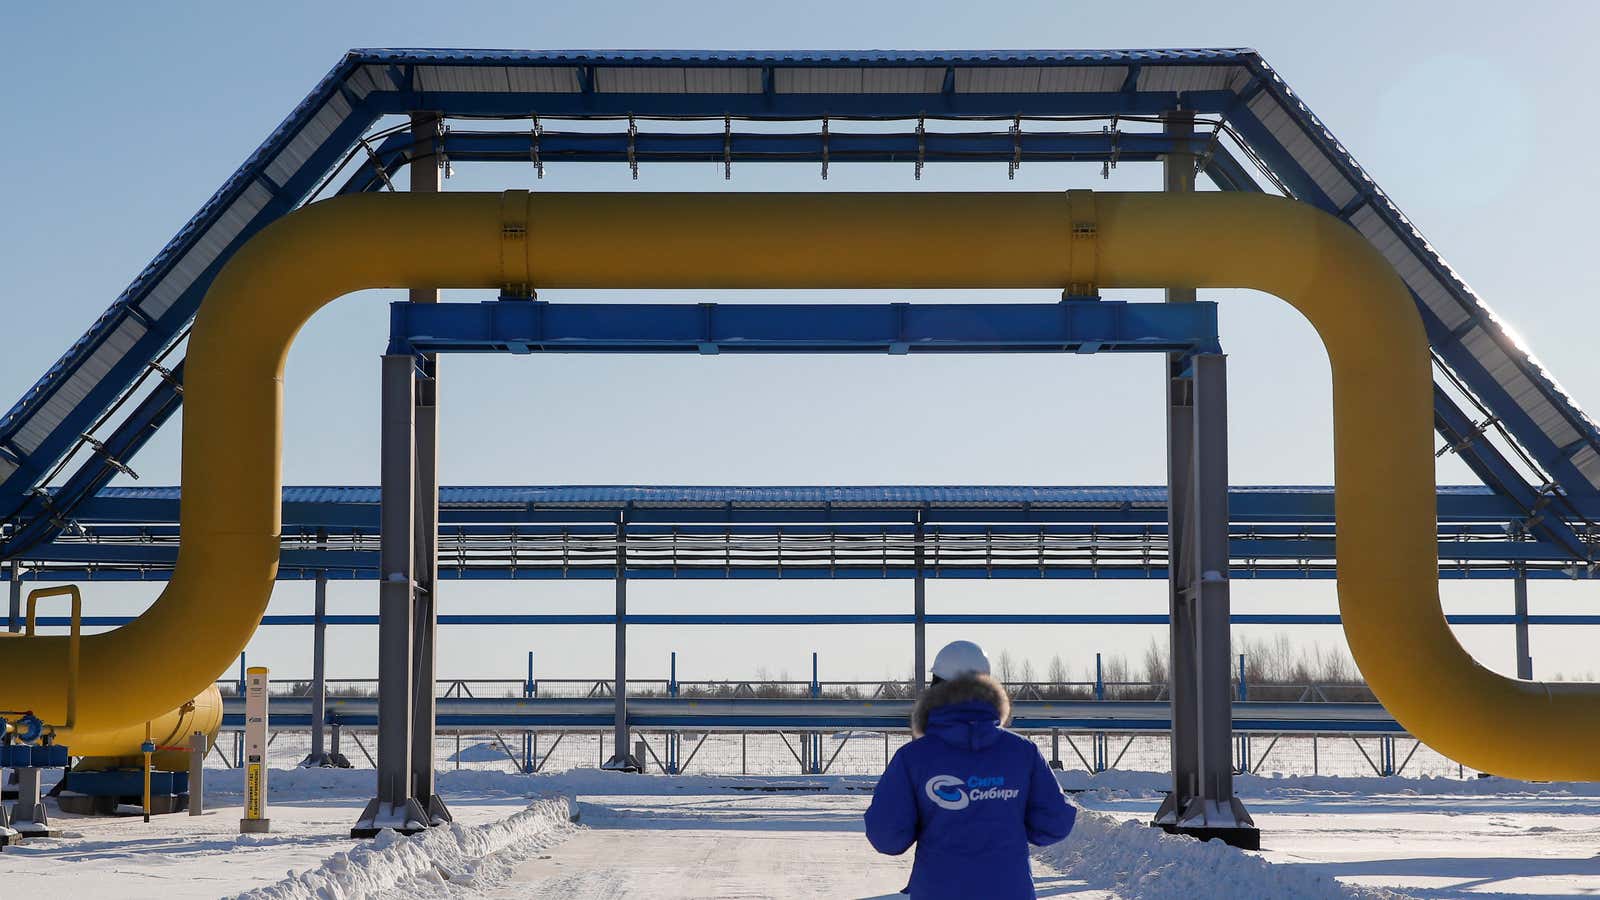 Russia’s gas delivery network is designed to serve Europe and can’t easily be redirected.